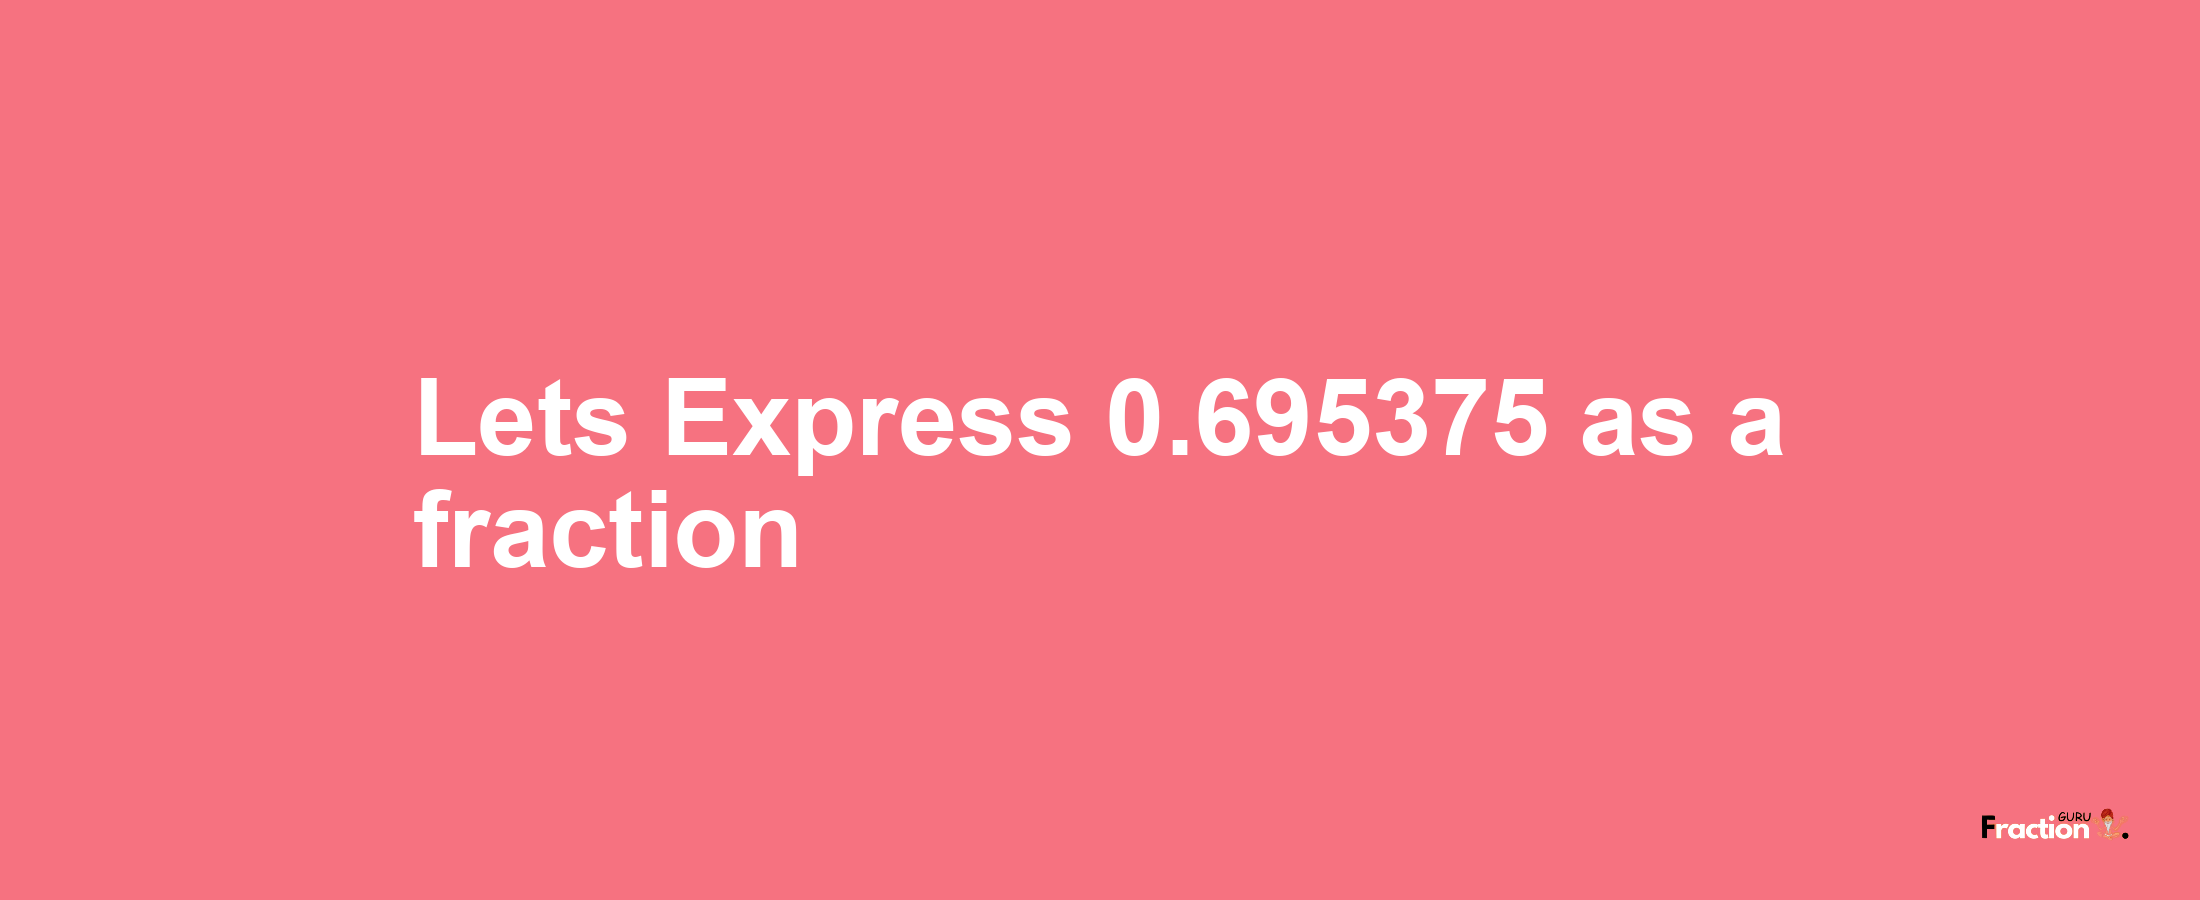 Lets Express 0.695375 as afraction